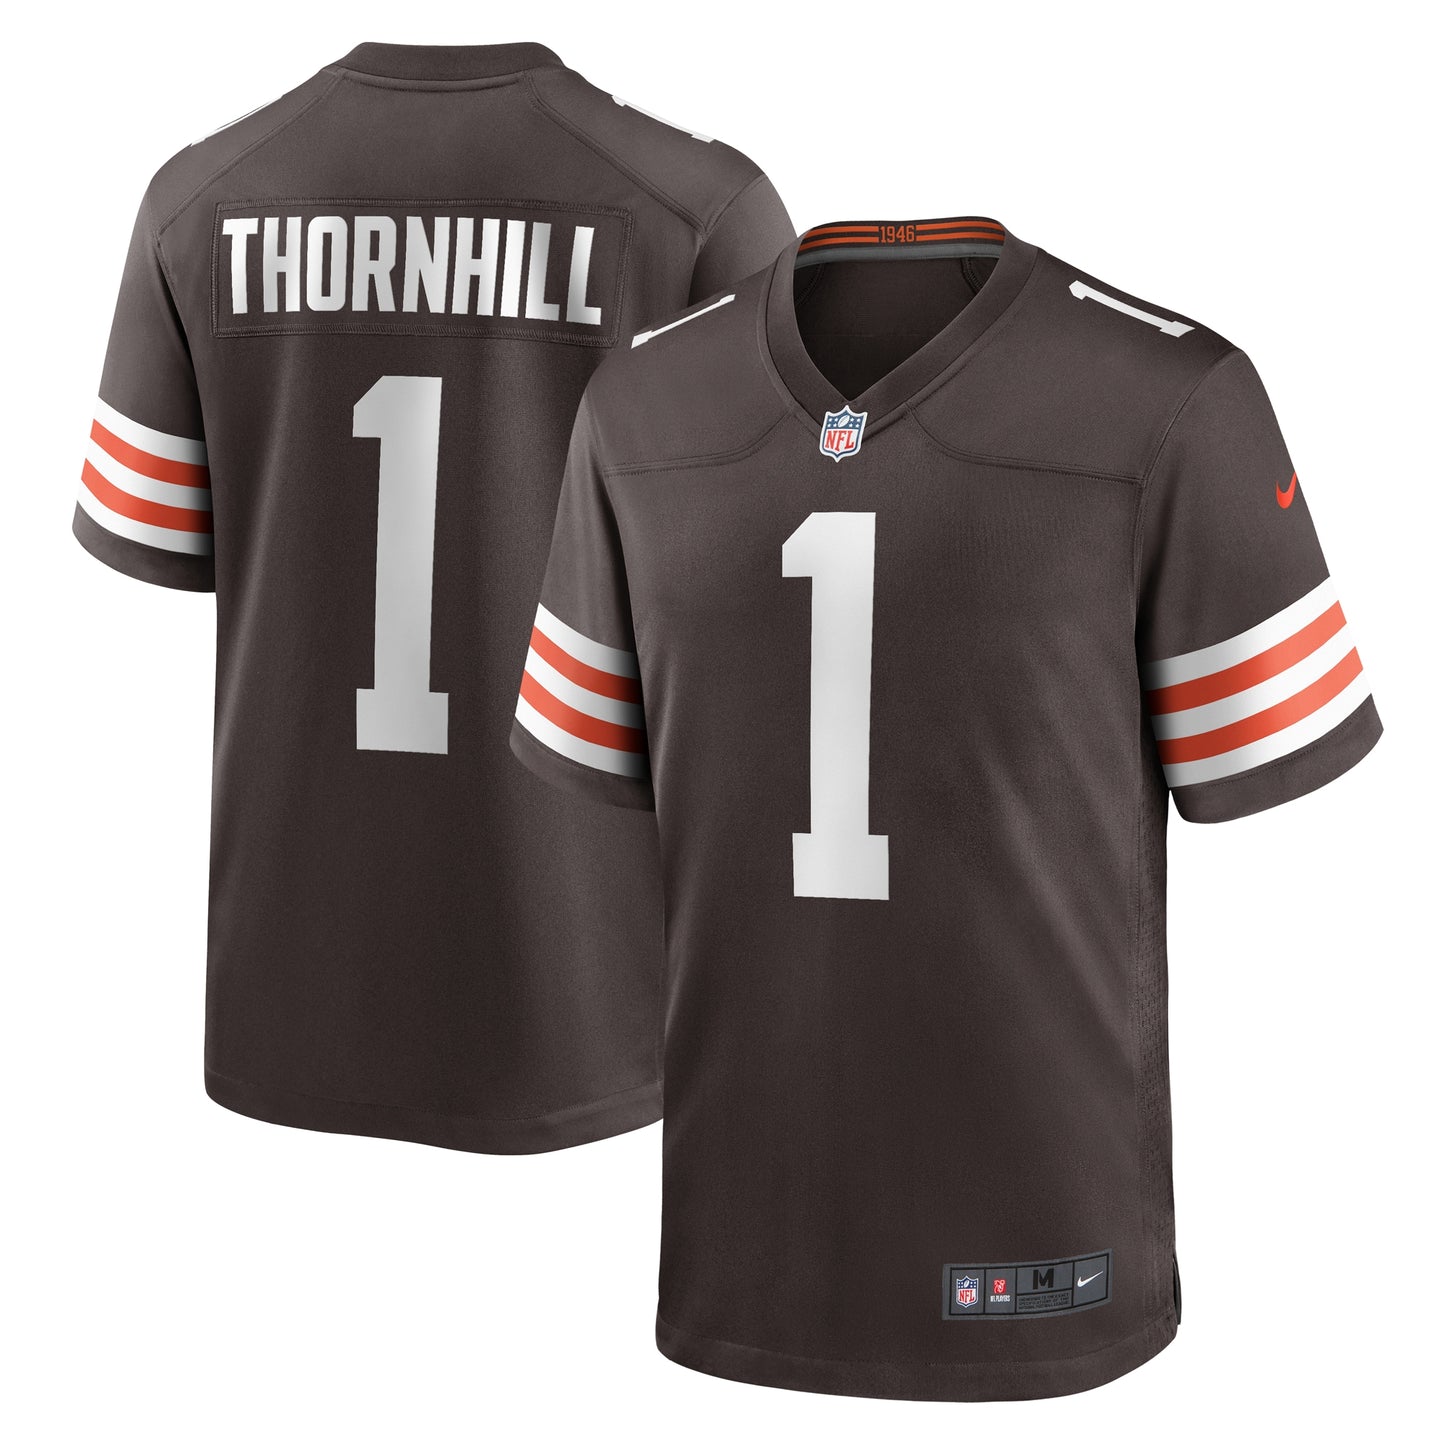 Juan Thornhill Cleveland Browns Nike Team Game Jersey - Brown